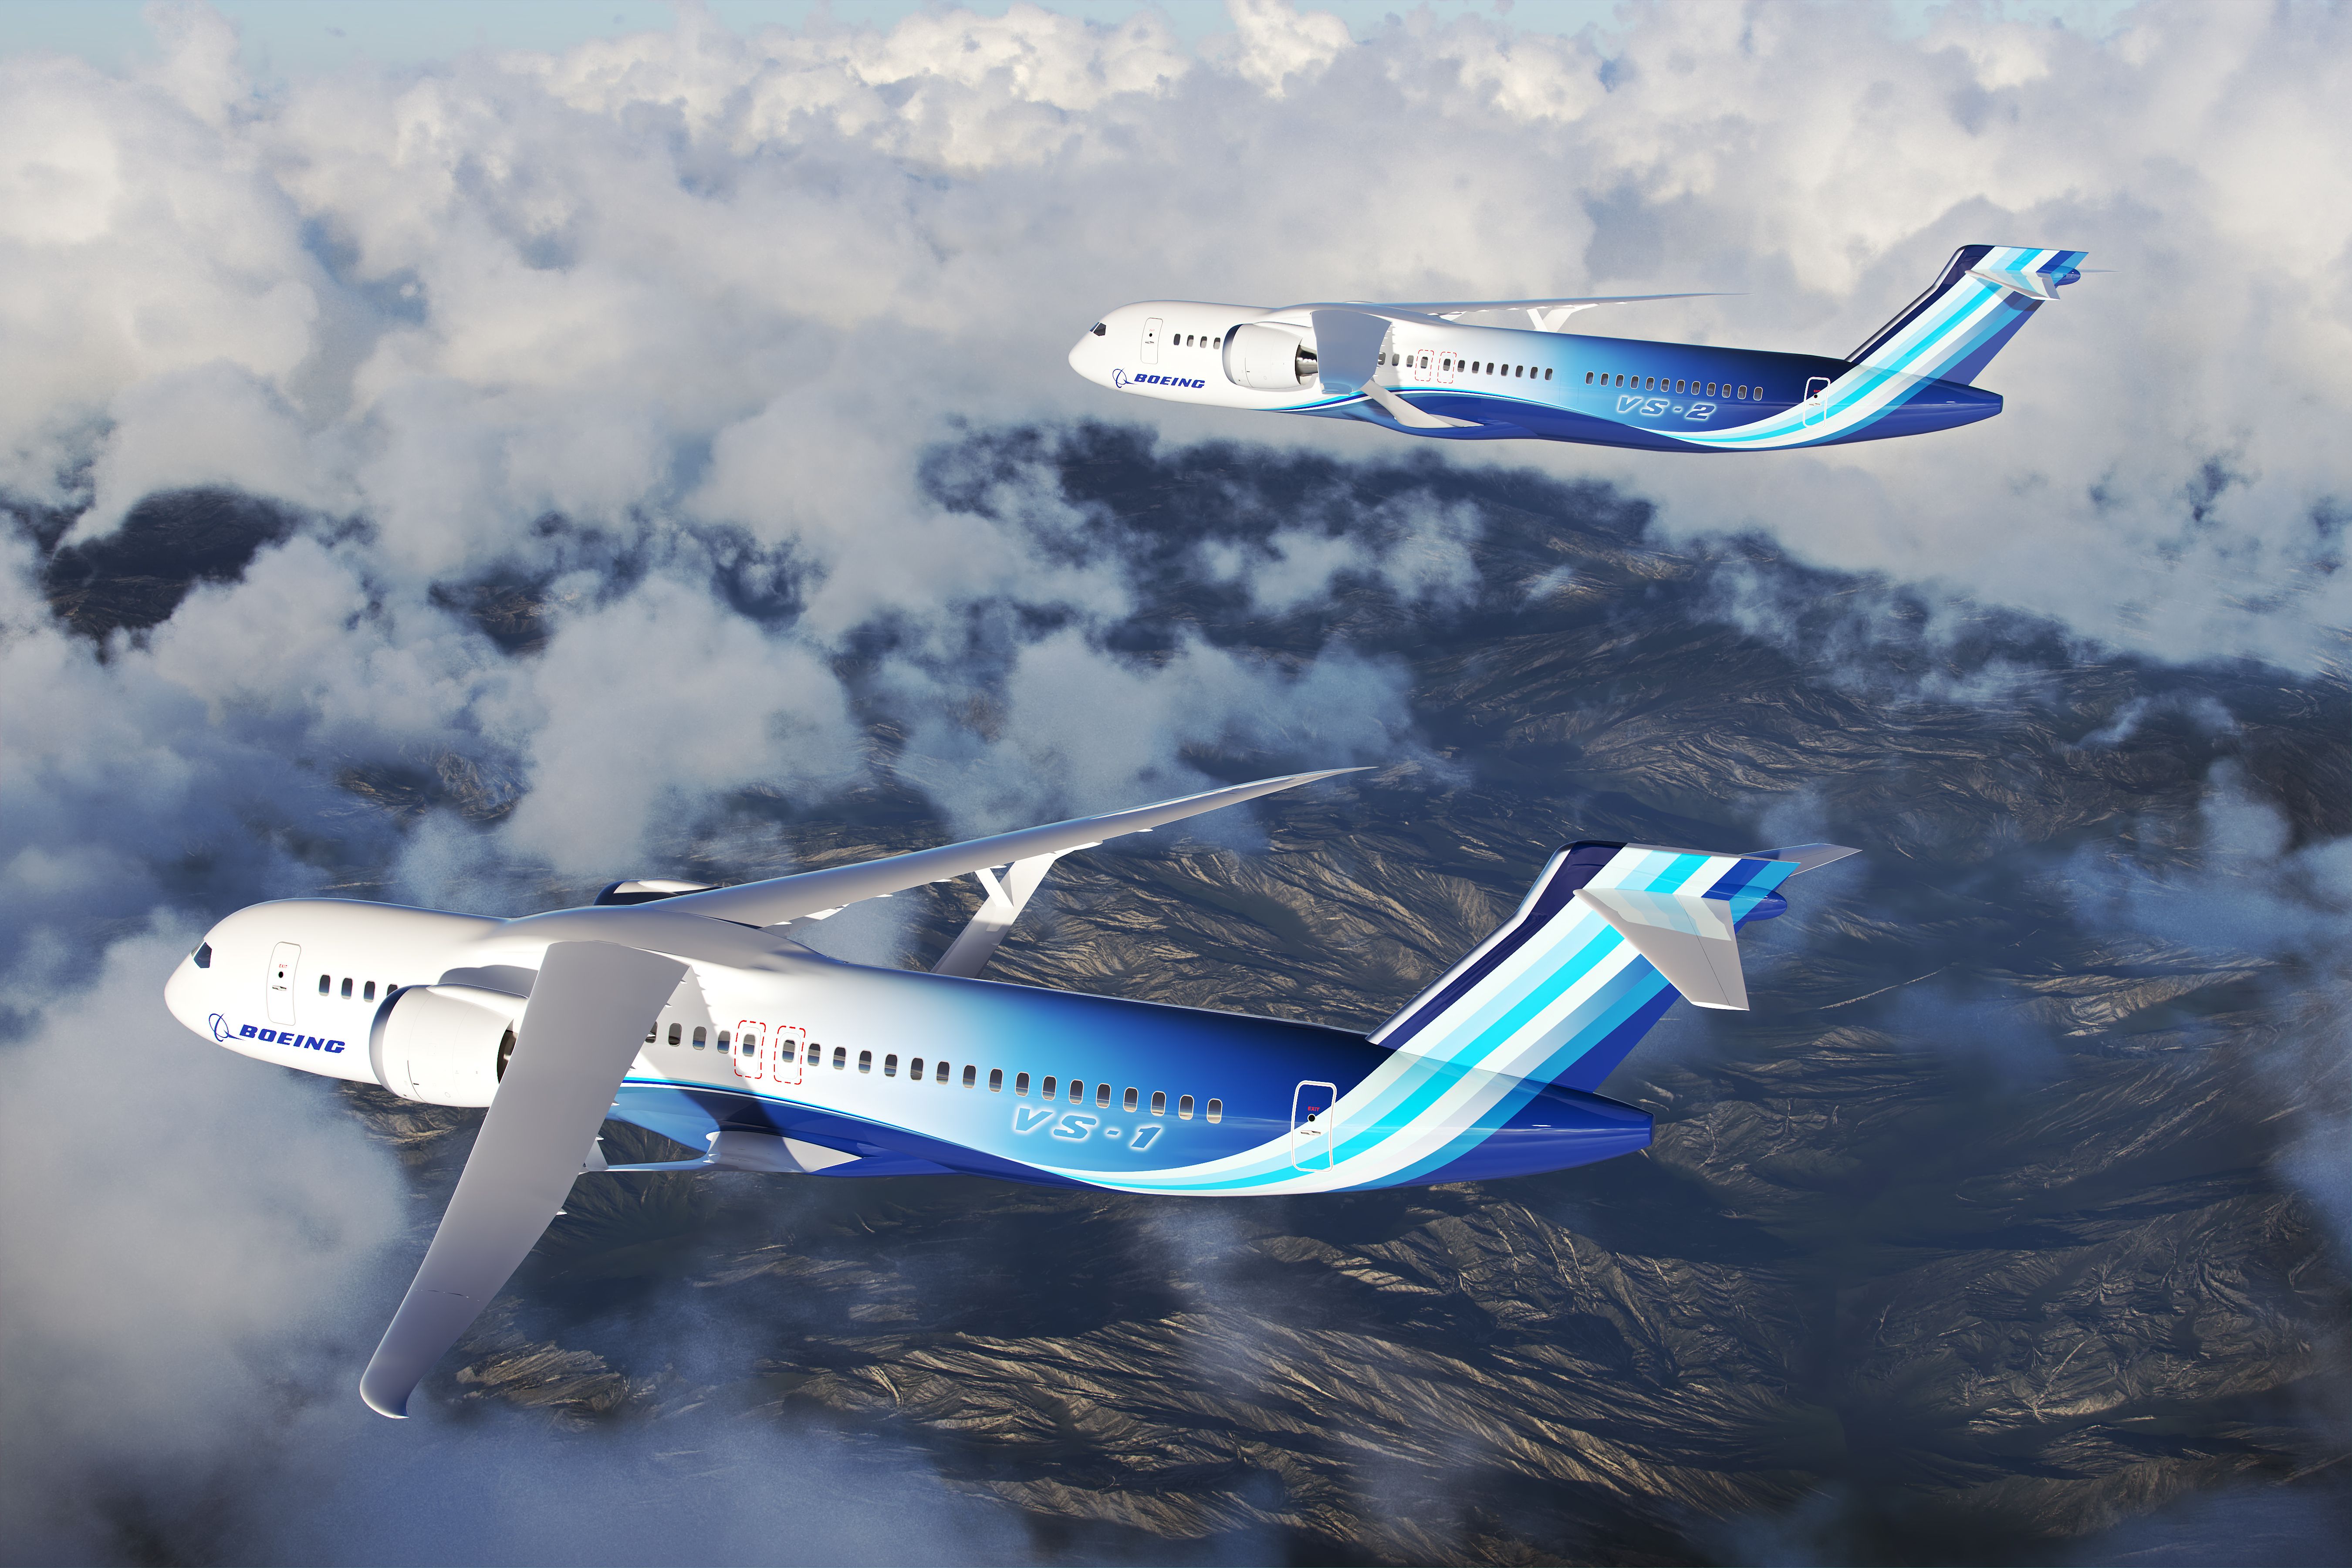 NASA and Boeing's render of the Transonic Truss-Braced Wing demonstrator aircraft